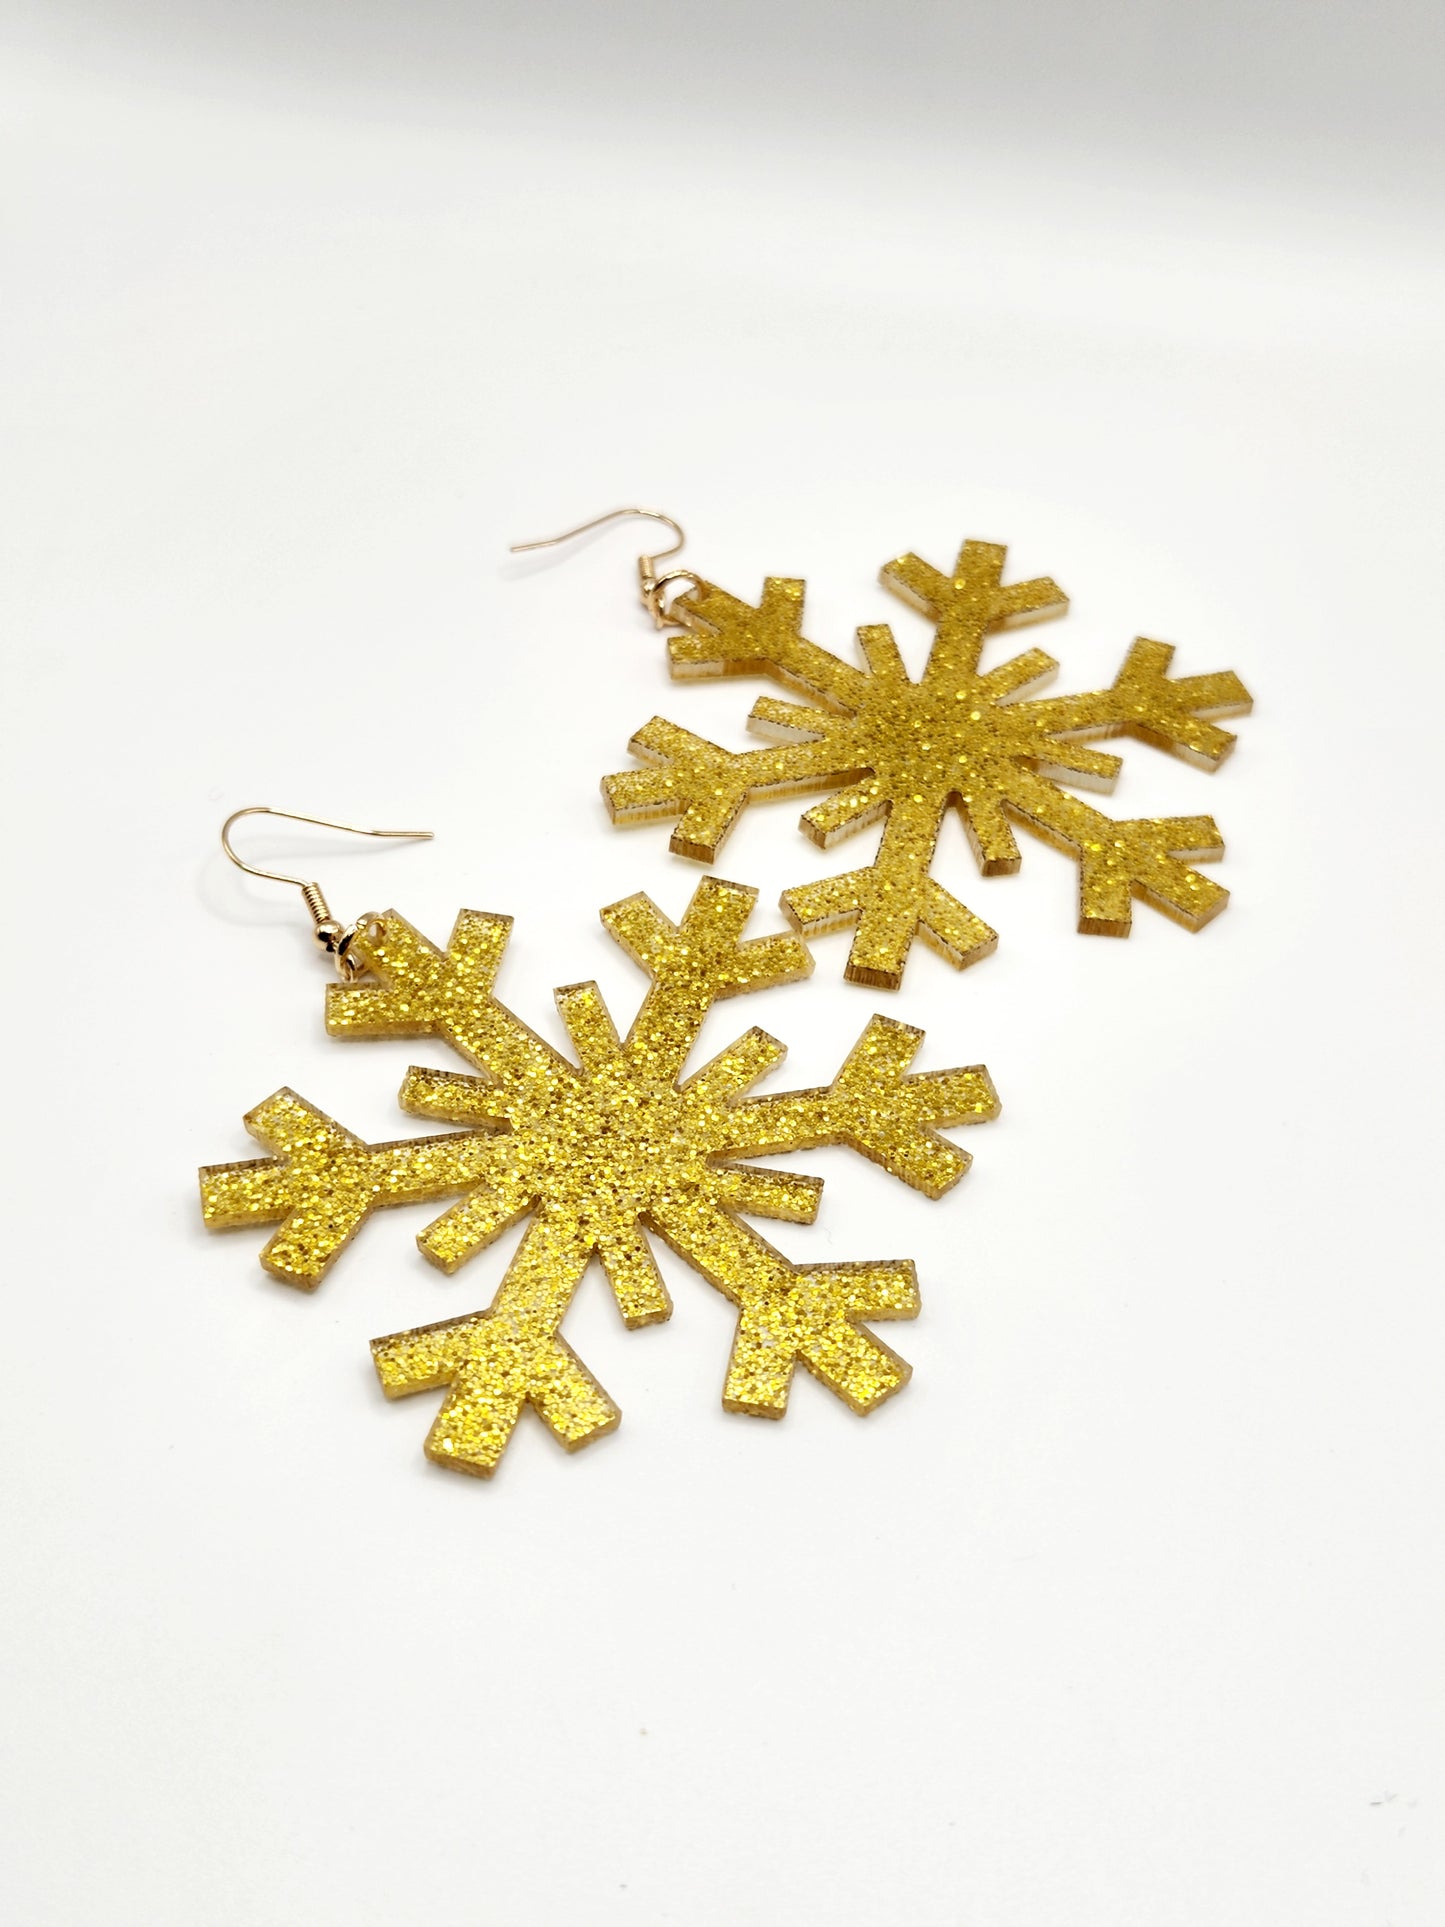 Snowman and Gold Snowflake Set